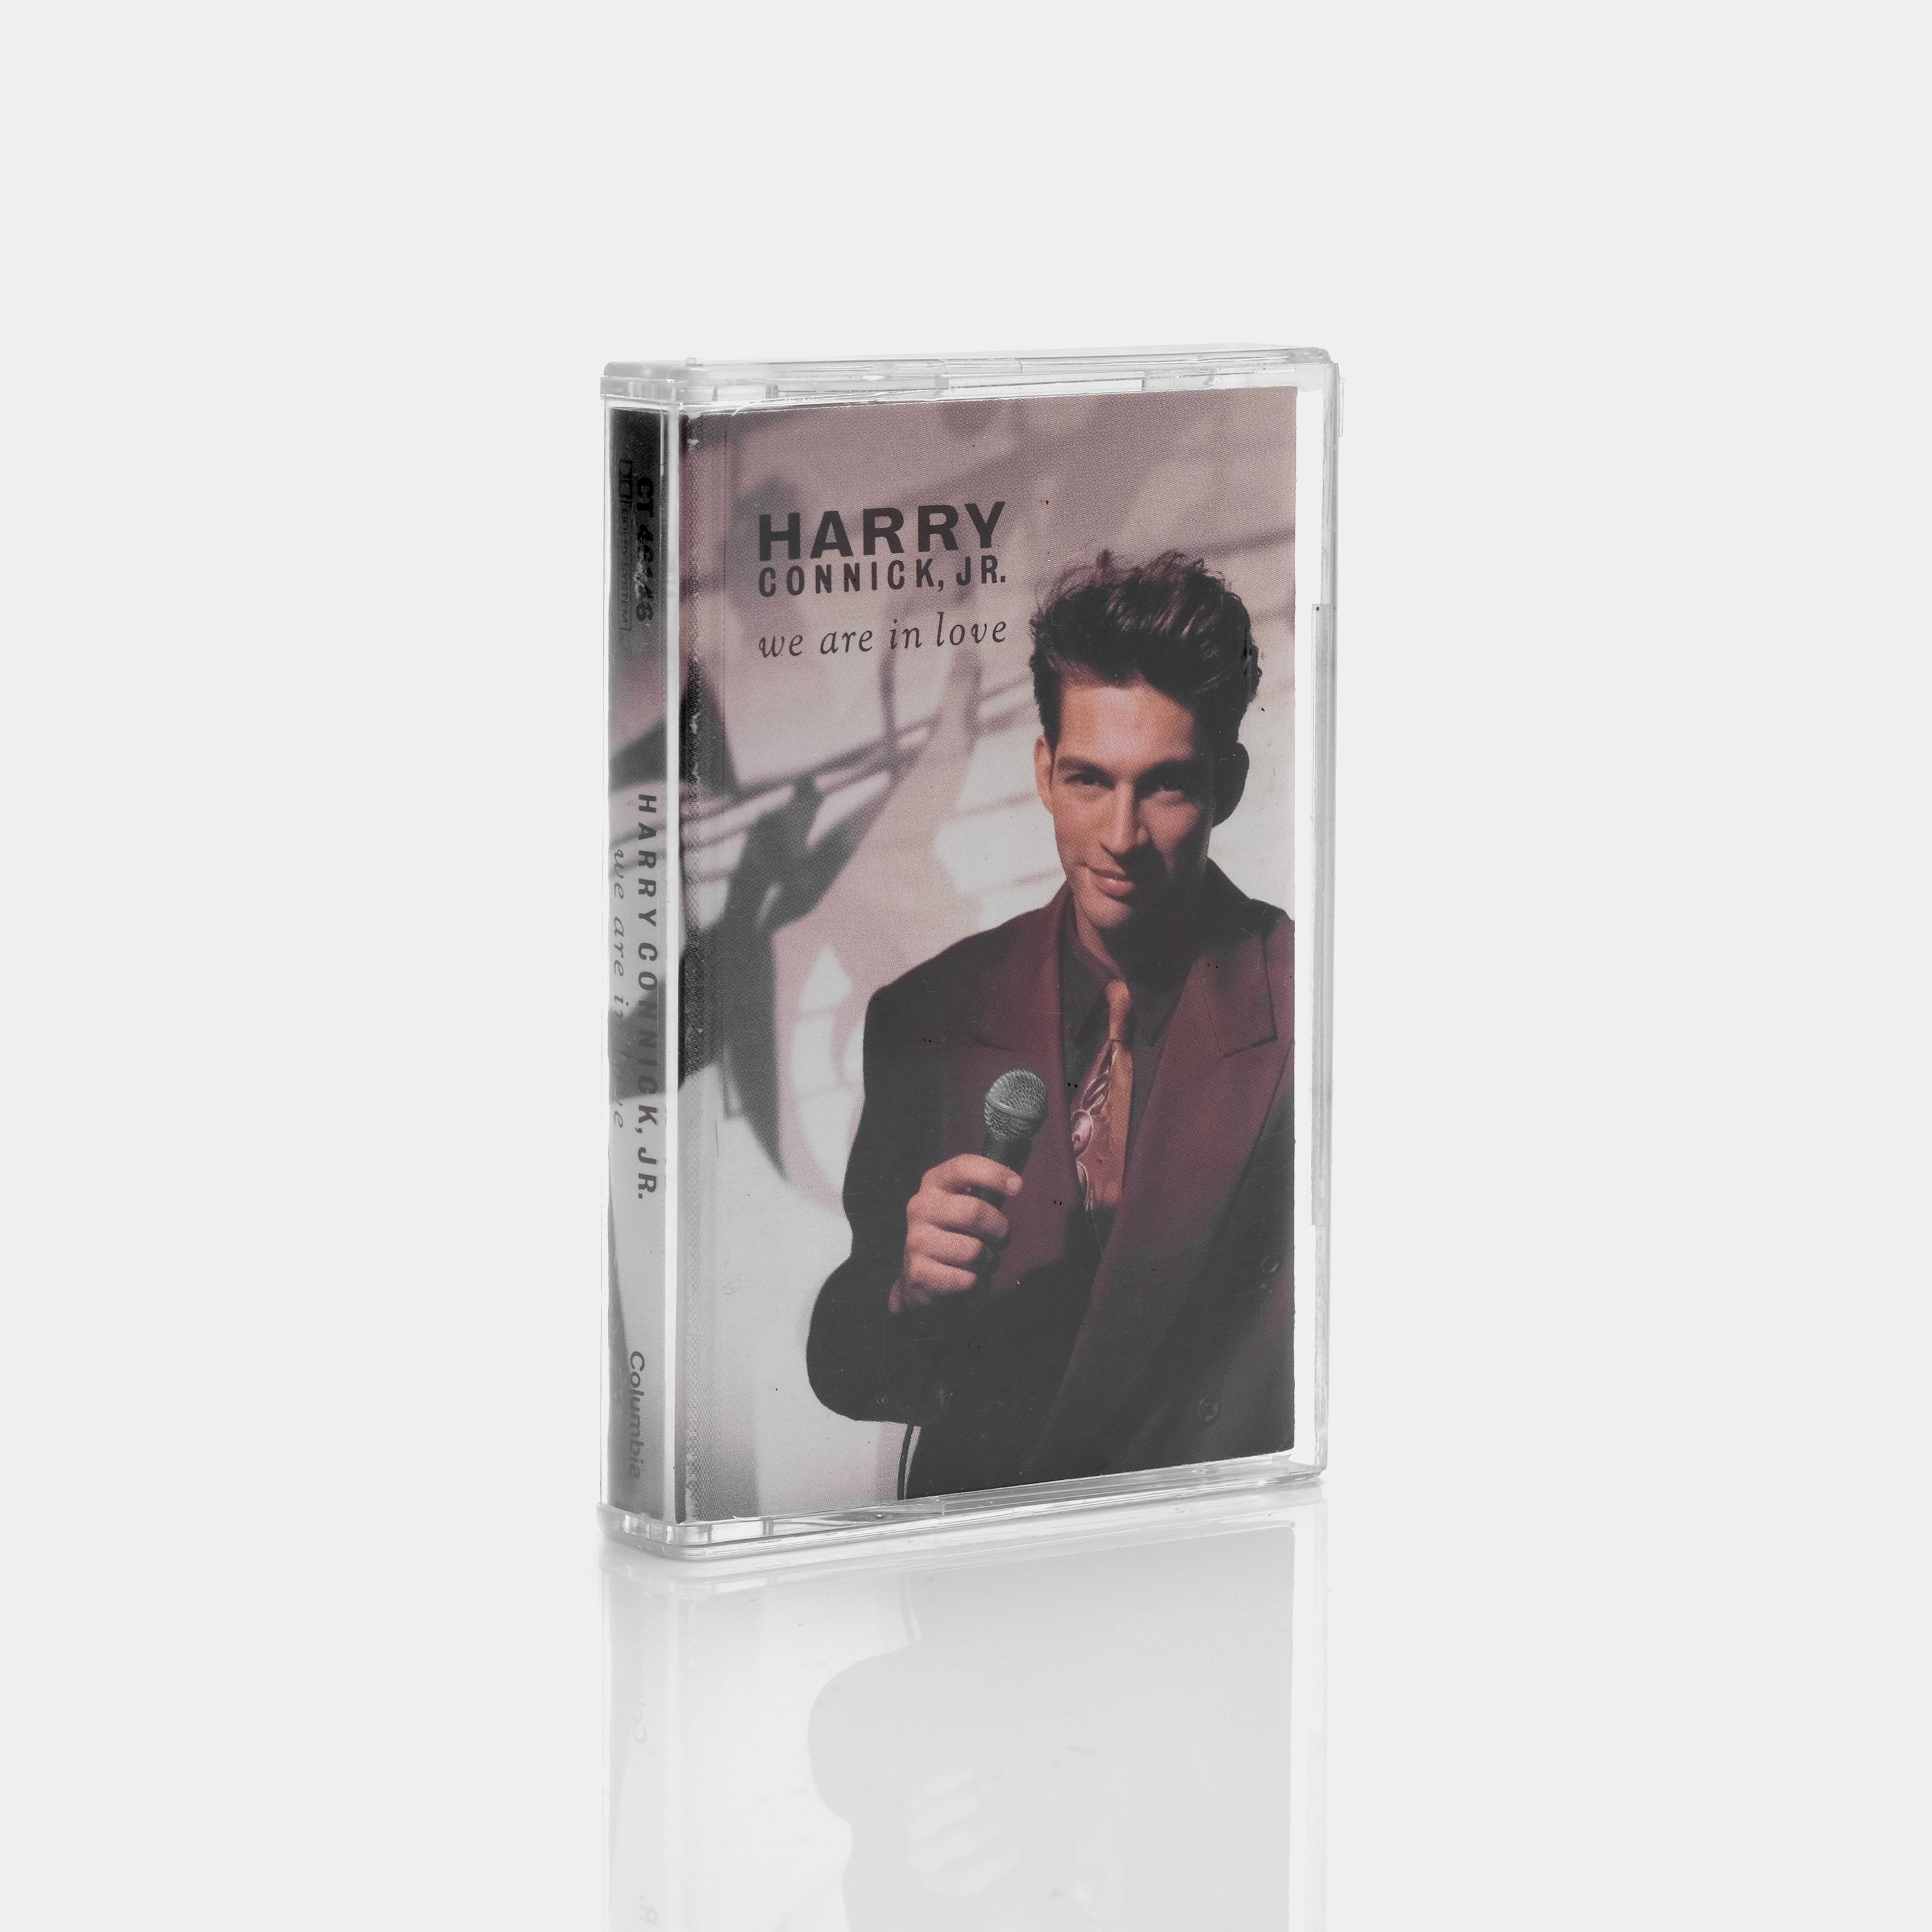 Harry Connick, Jr. - We Are In Love Cassette Tape